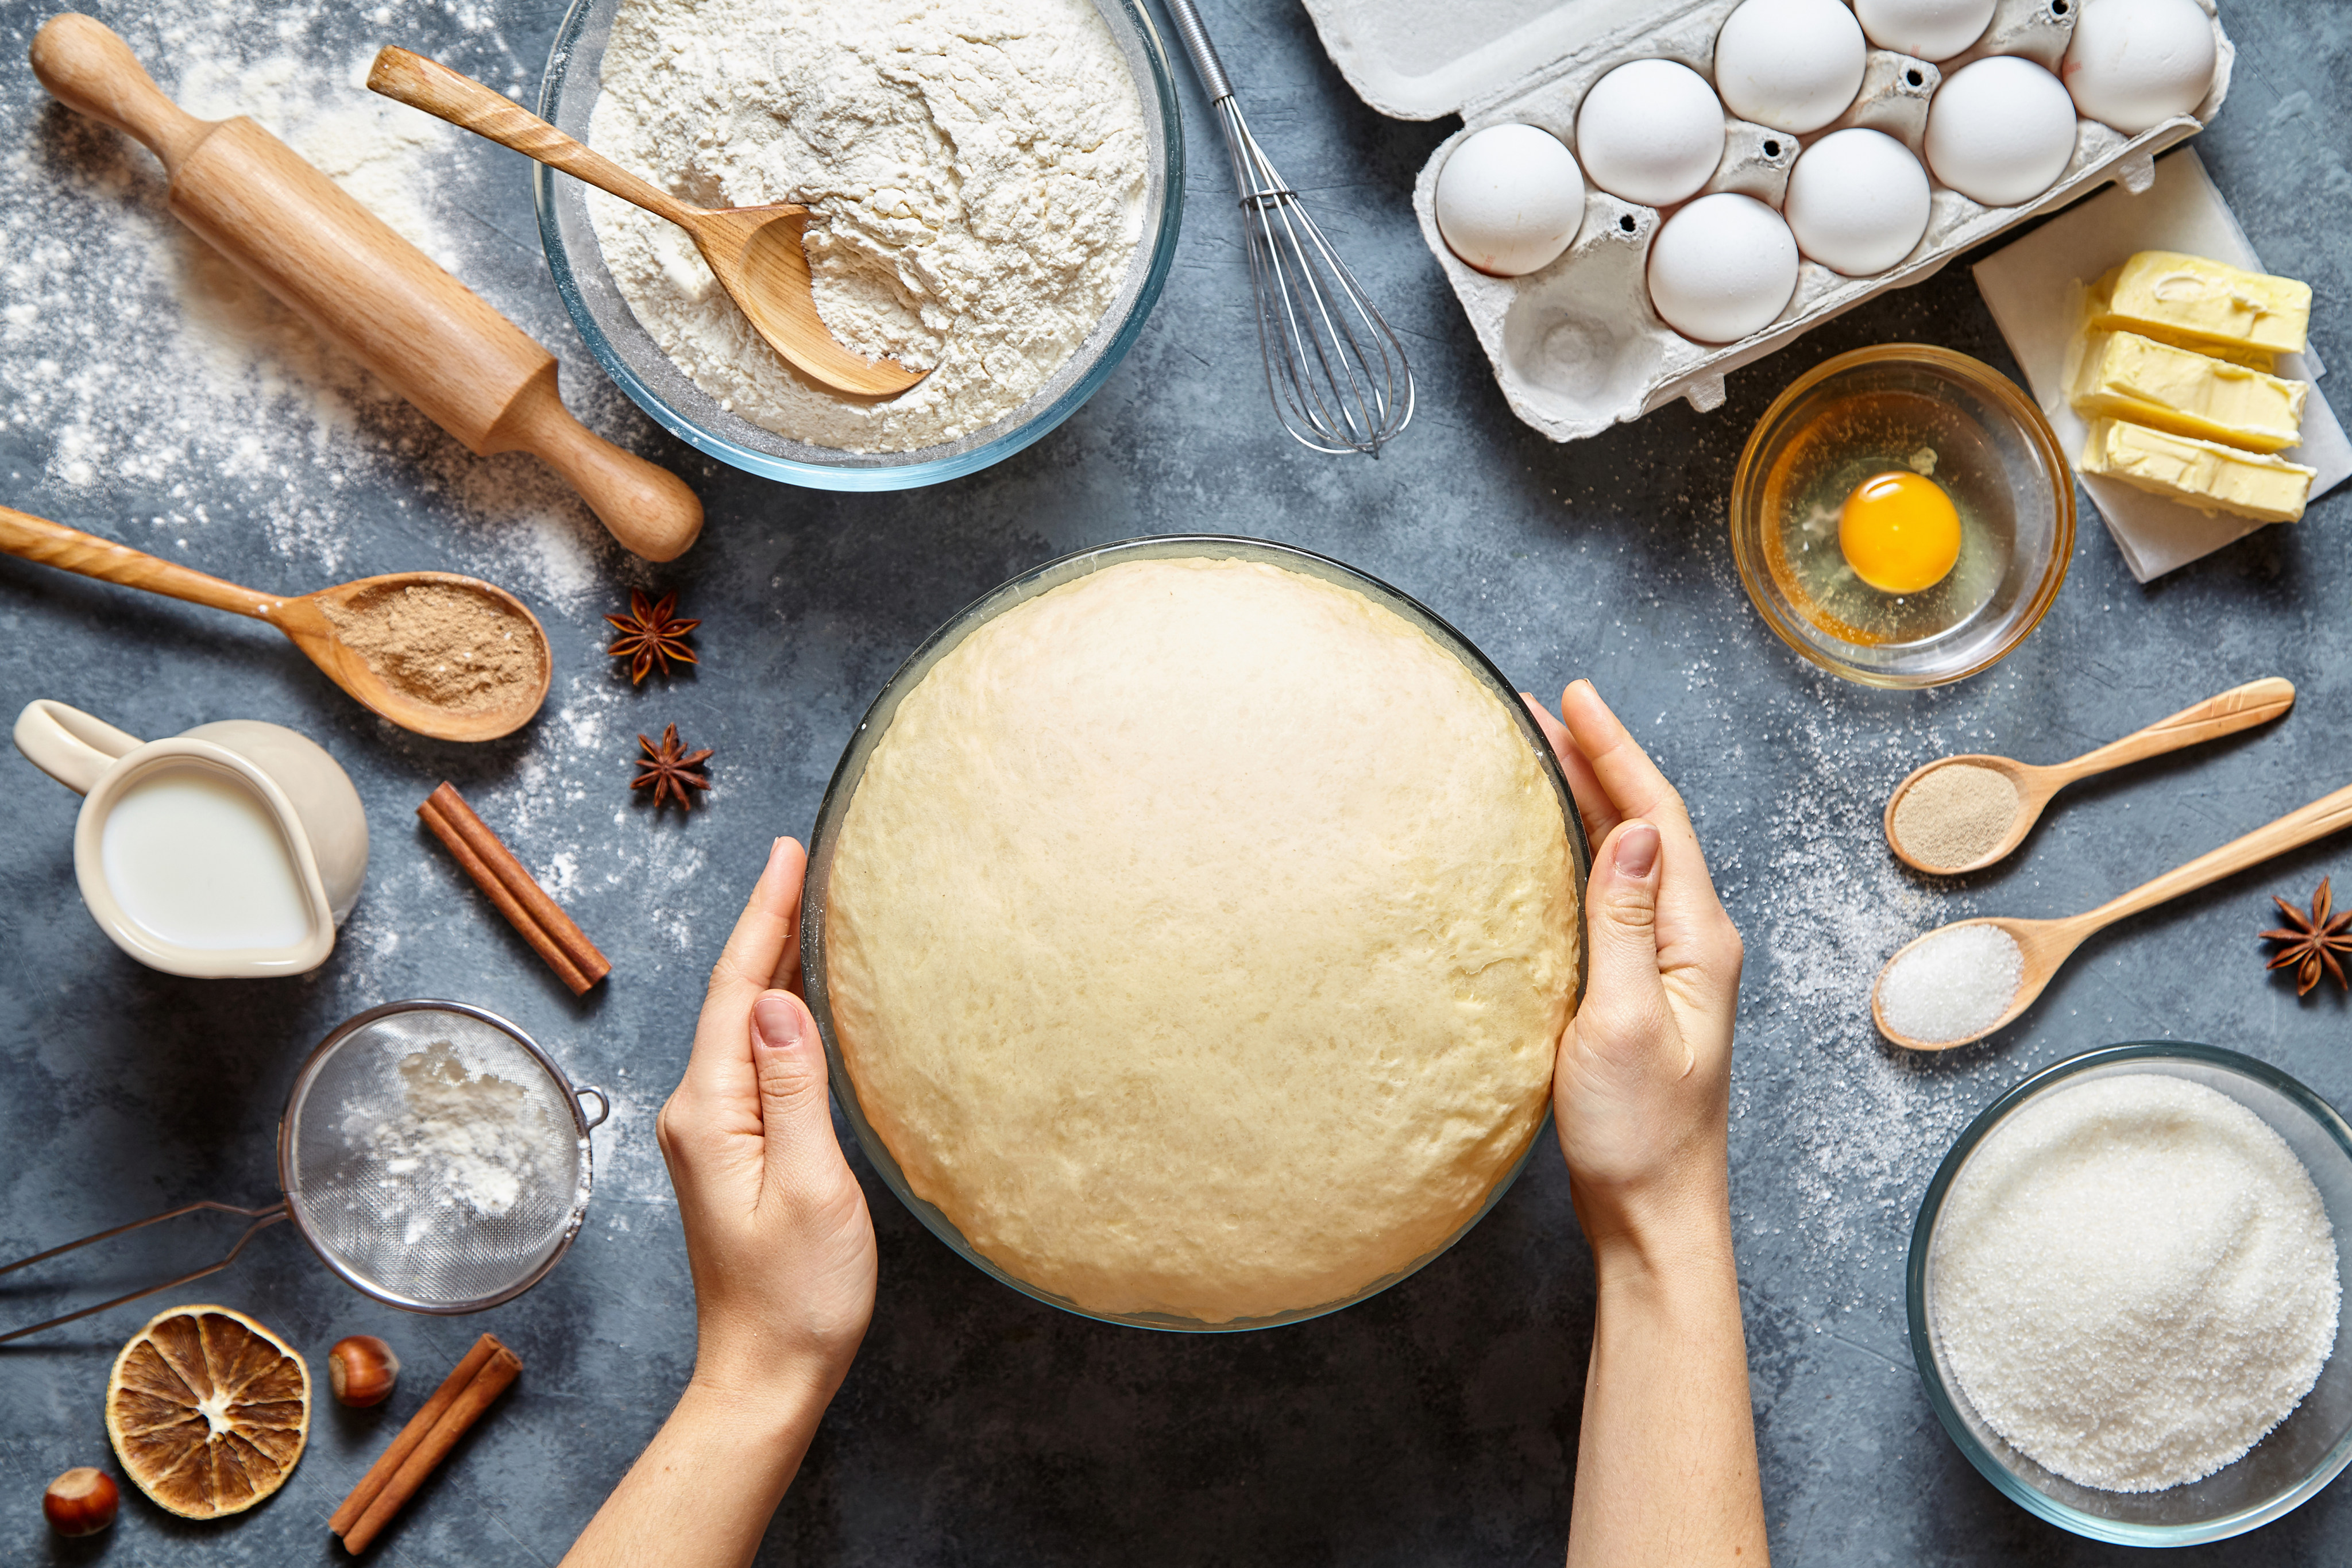 Home baking has taken off in Hong Kong, from making cupcakes and macarons to sourdough bread. Photo: Shutterstock 